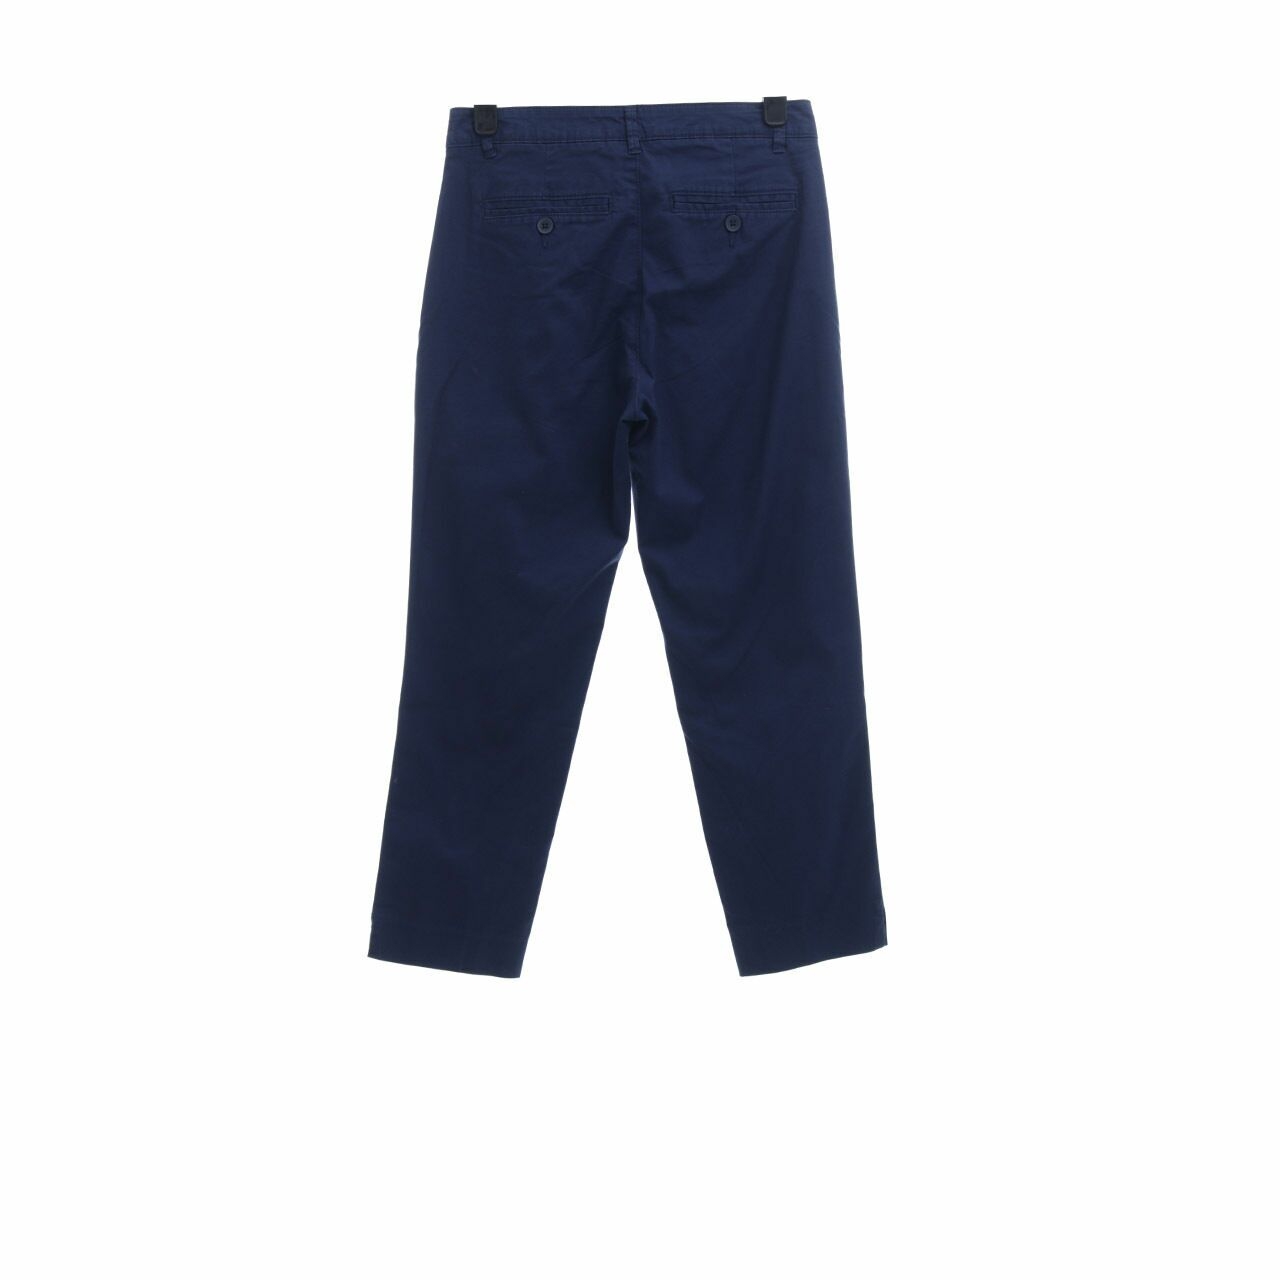 United Colors Of Benetton Navy Long Pants